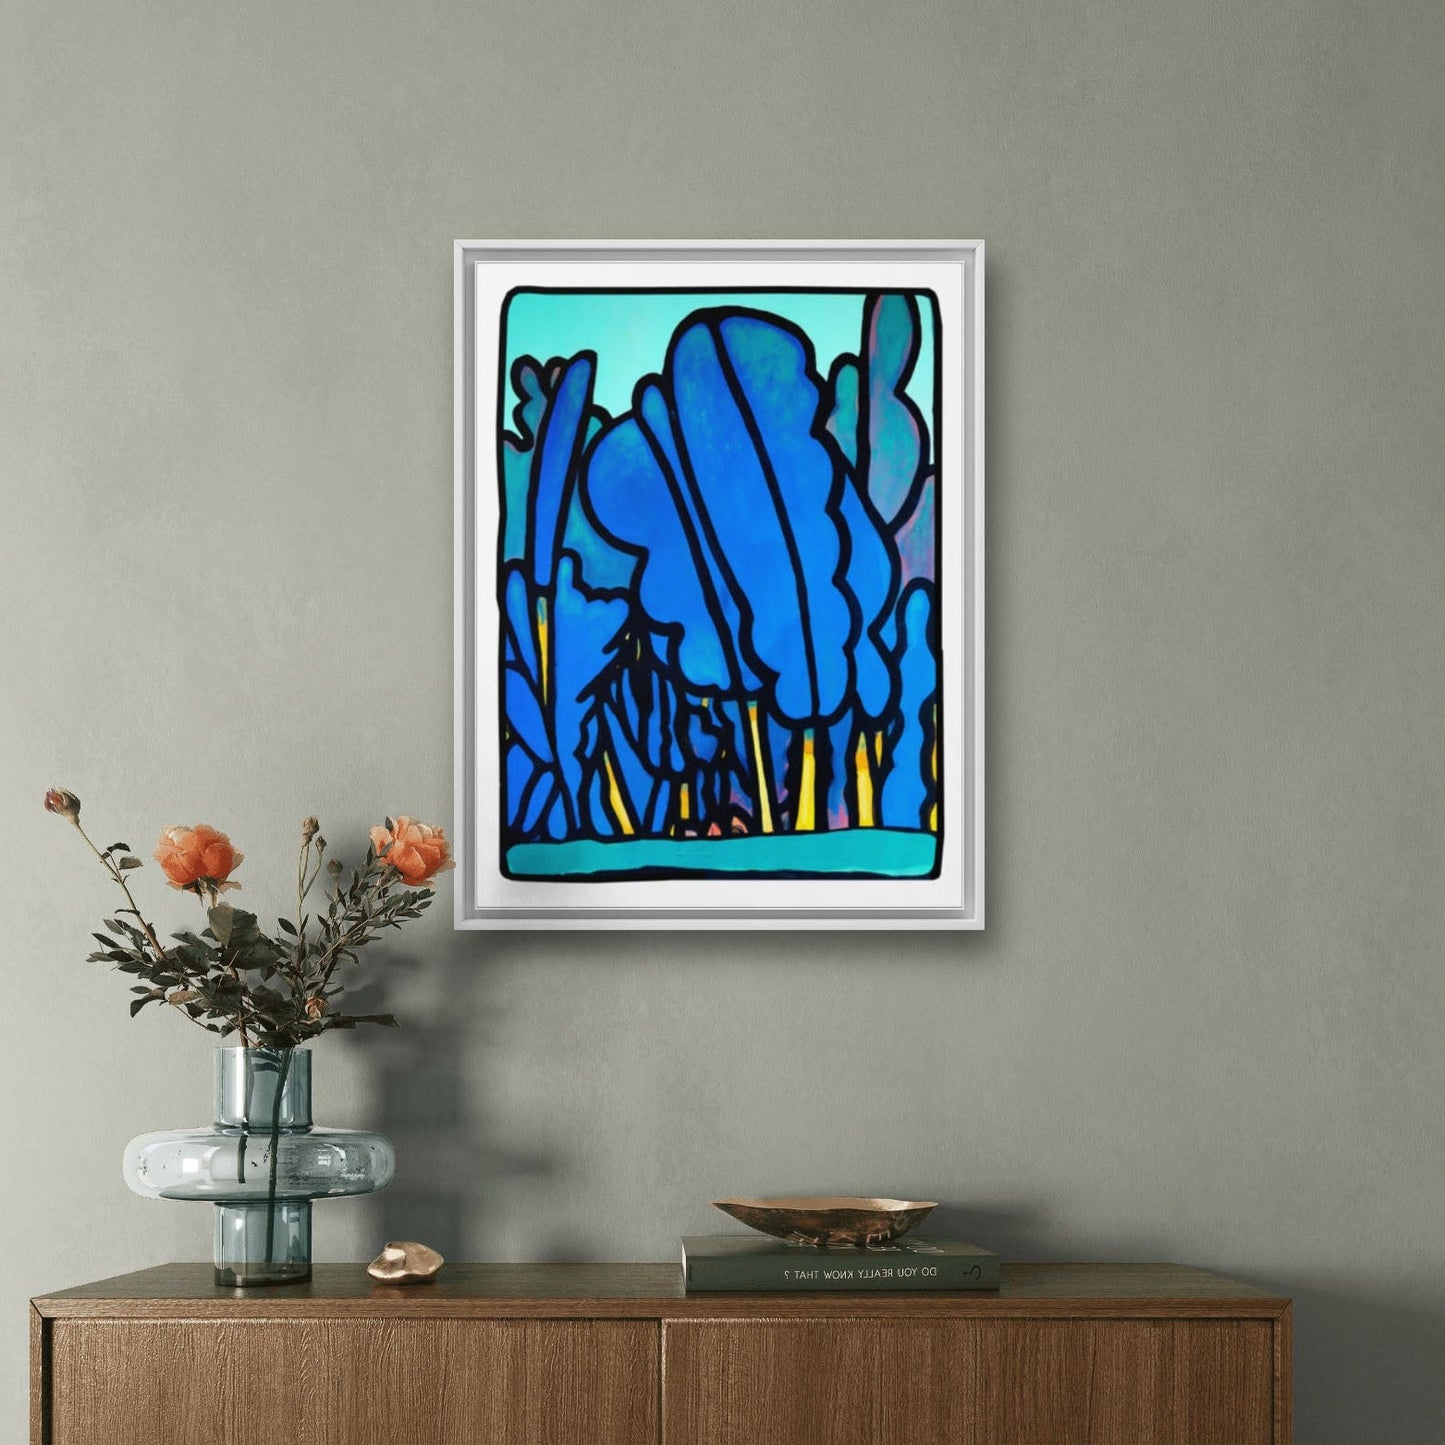 Blue Forest 18"x24" Framed Canvas